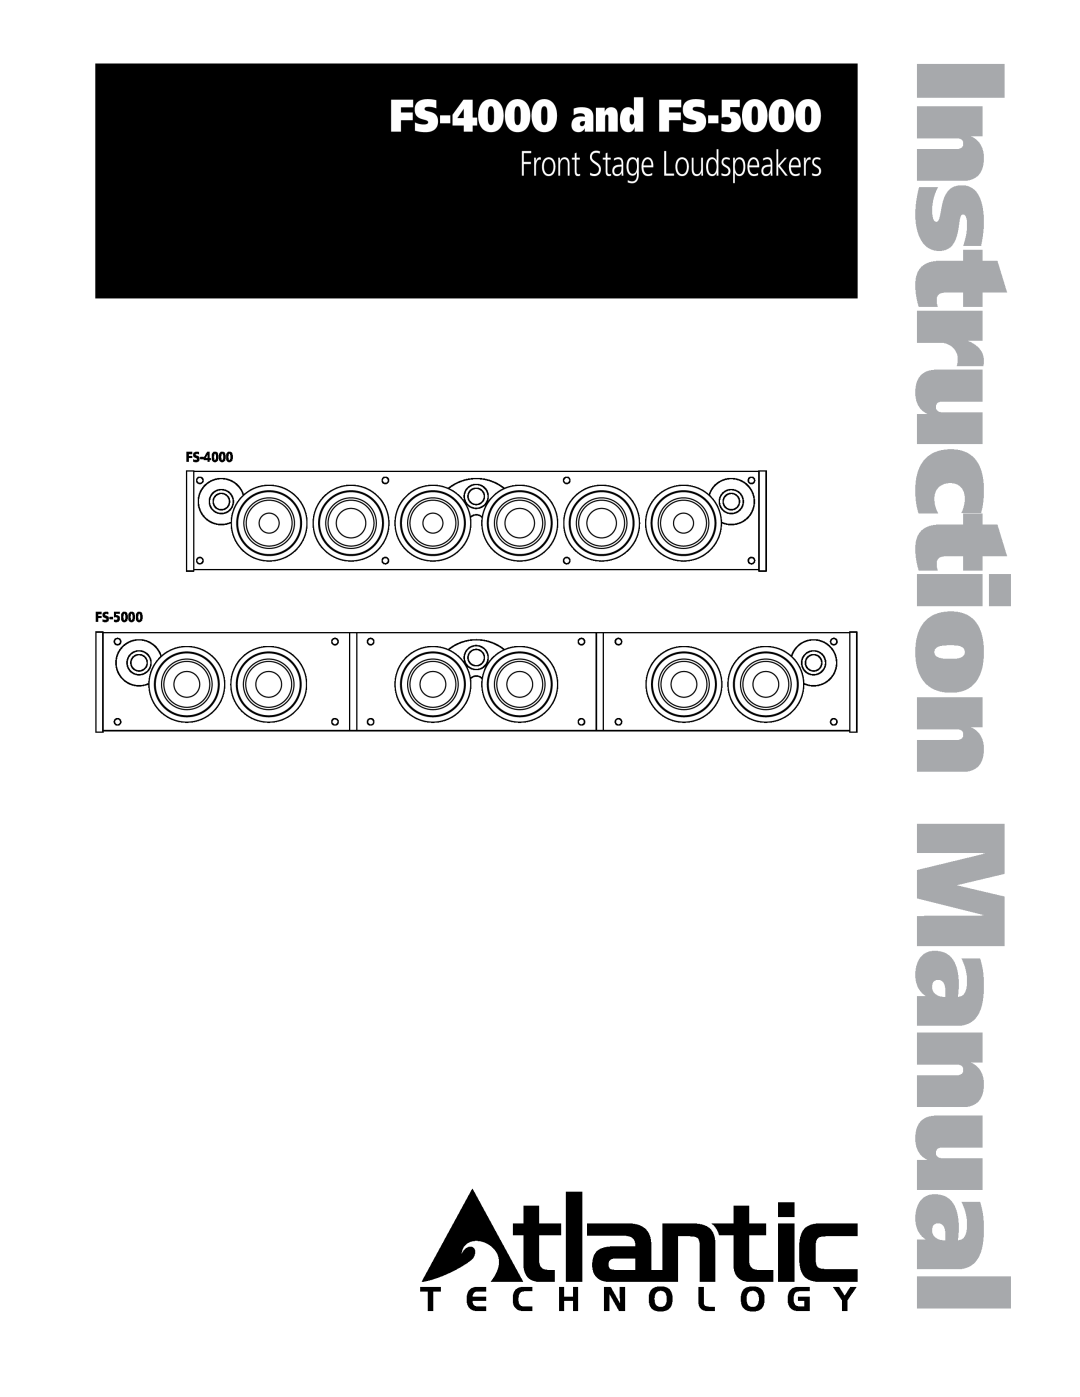 Atlantic Technology instruction manual FS-4000and FS-5000, Front Stage Loudspeakers 